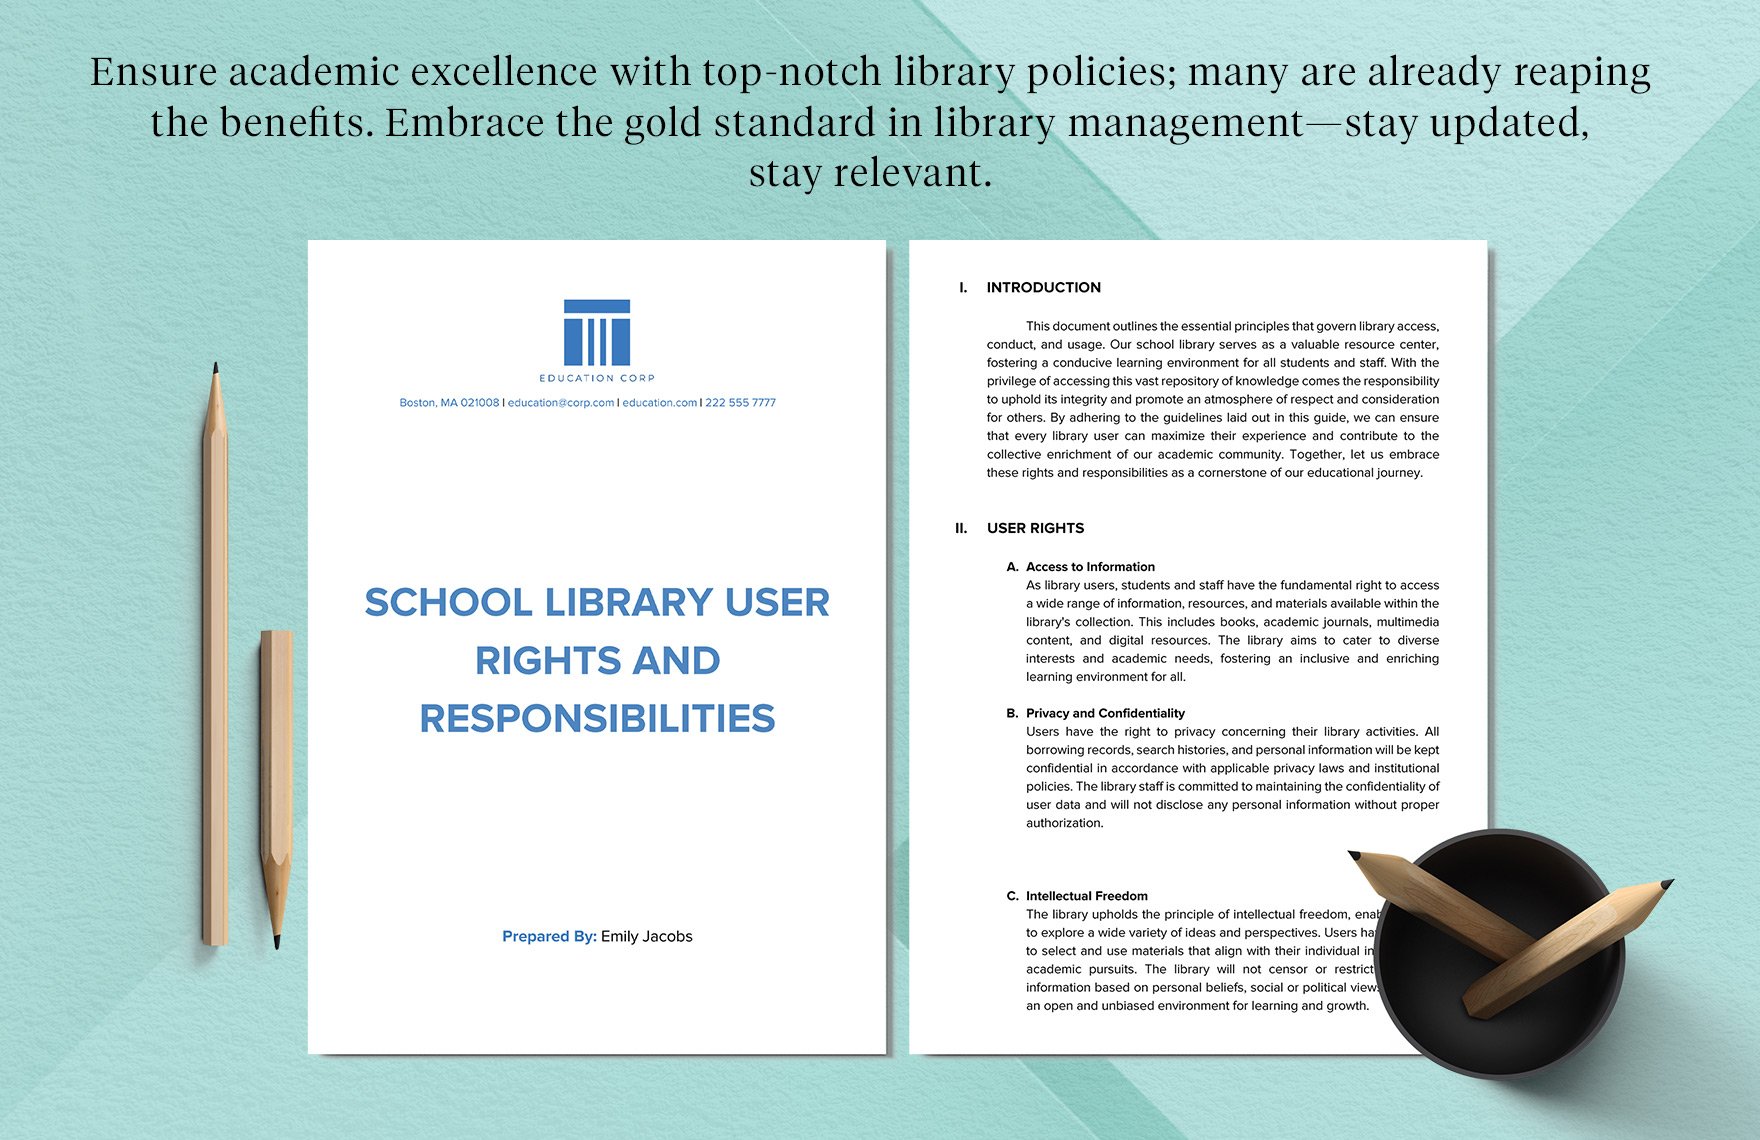 School Library User Rights and Responsibilities Template